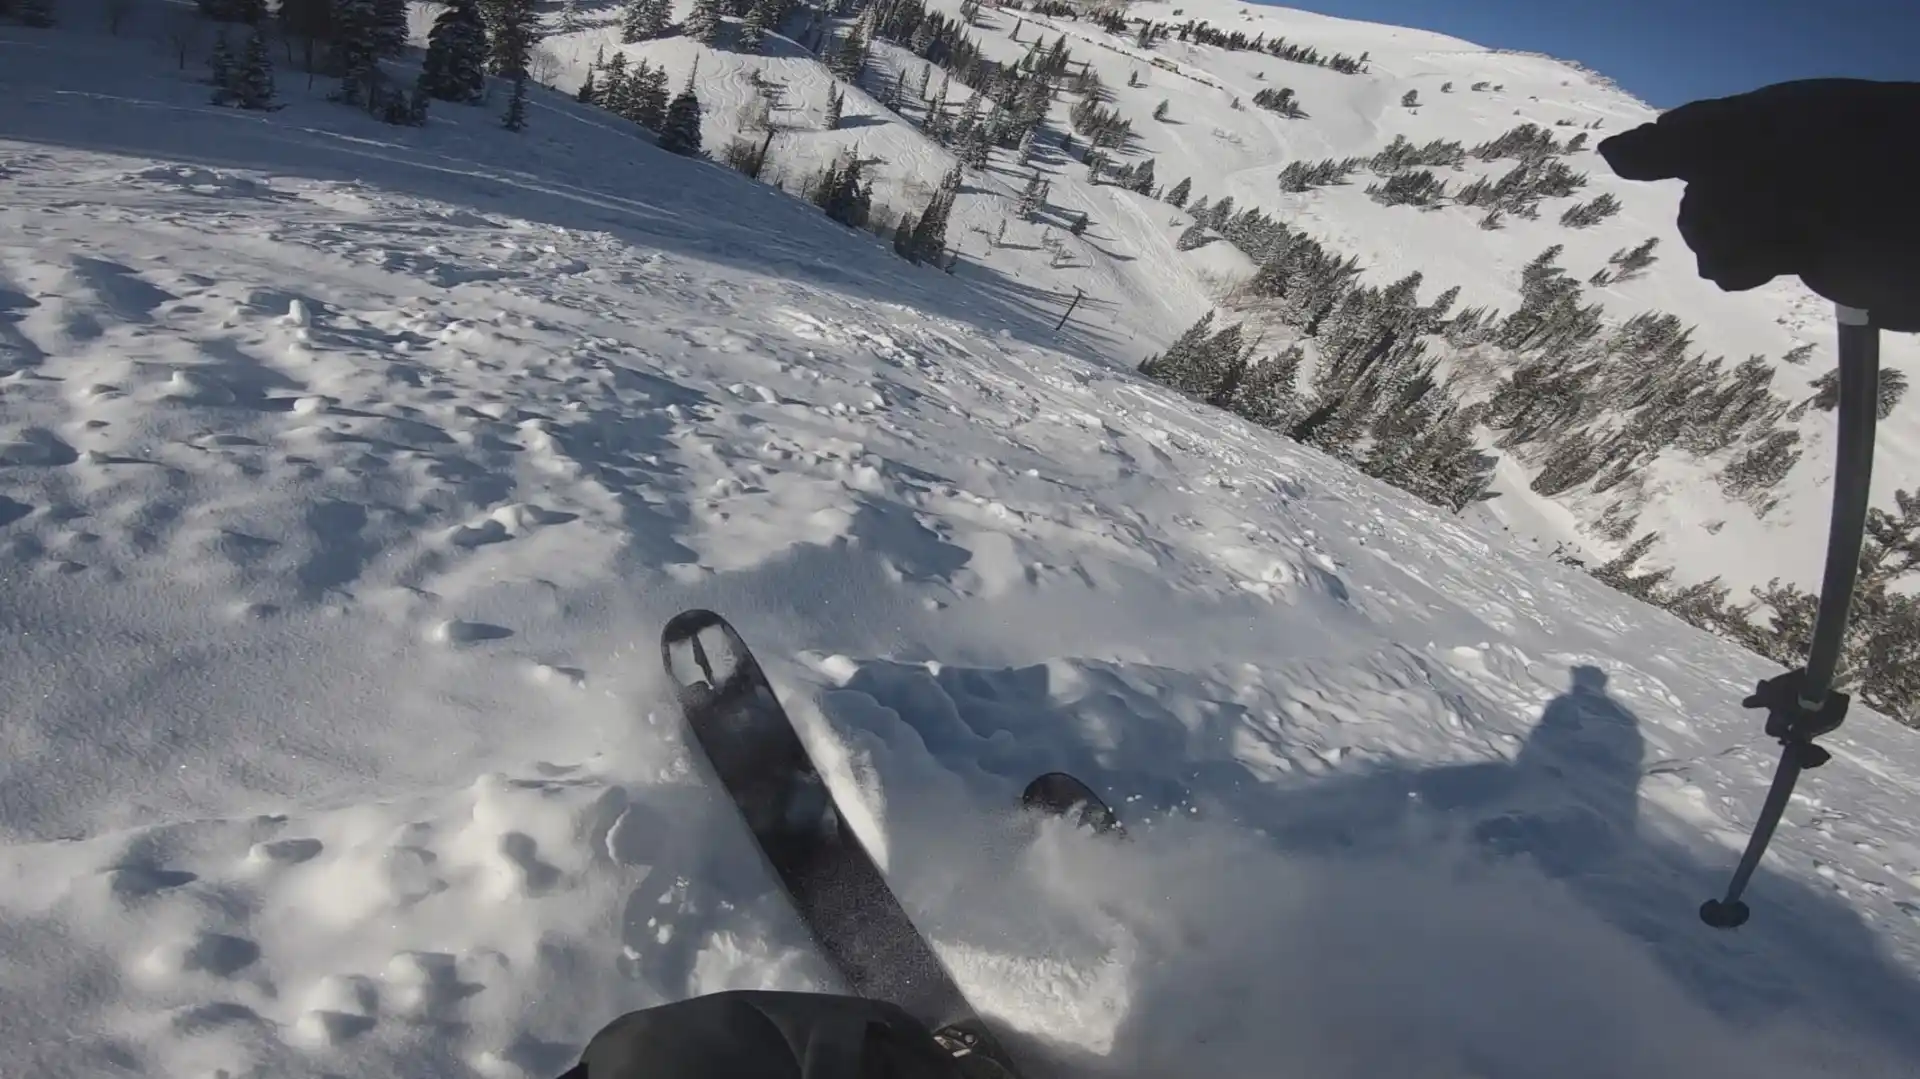 Keith is hitting some of the steeper off-piste runs at Powder Mountain